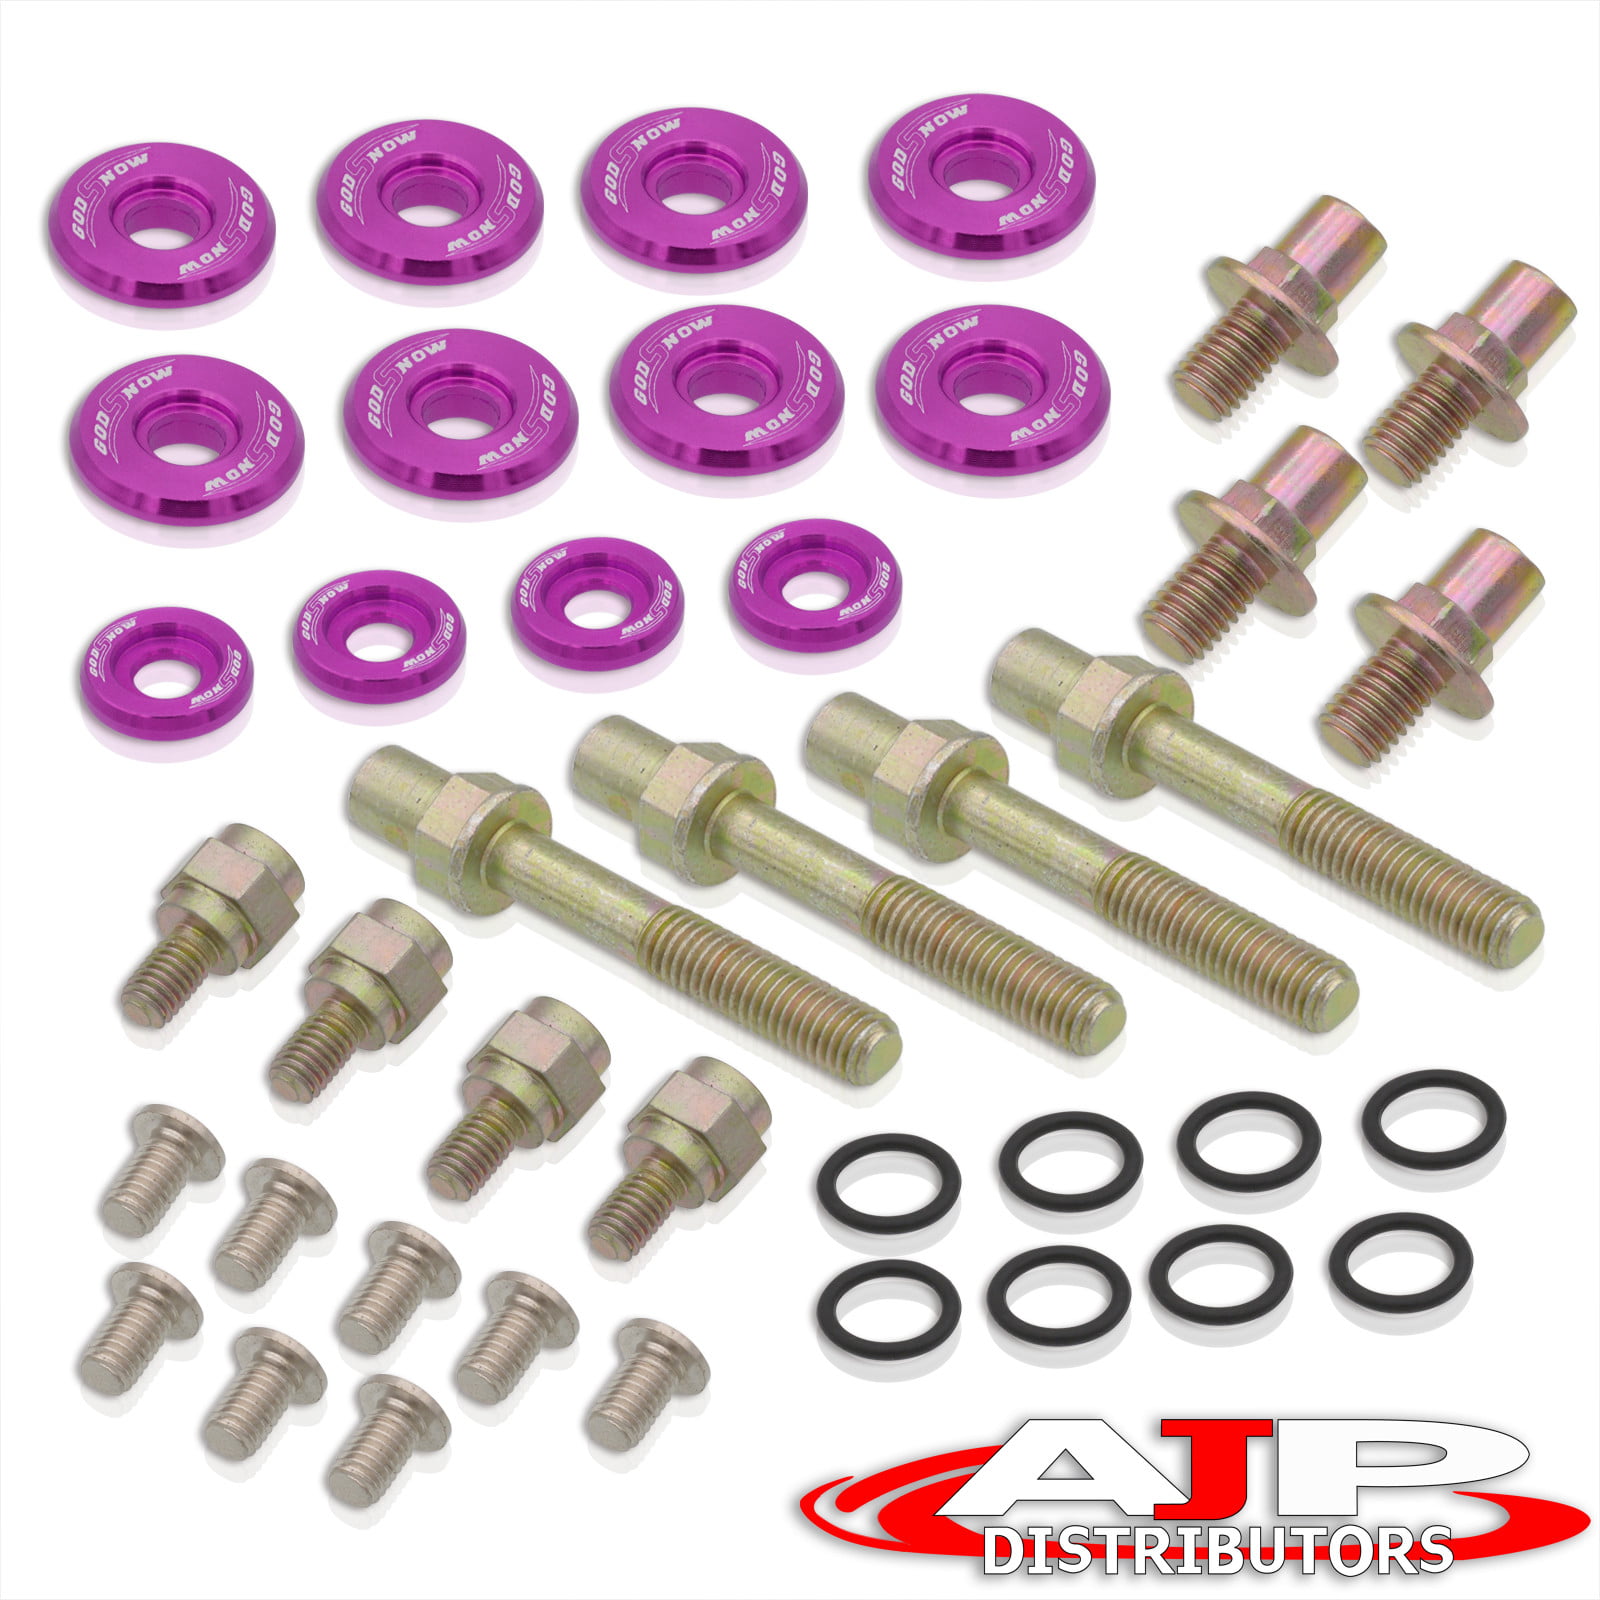 Car Cylinder Head Stud Bolt Nut Kit Replacement for Acura Integra 1986-2001